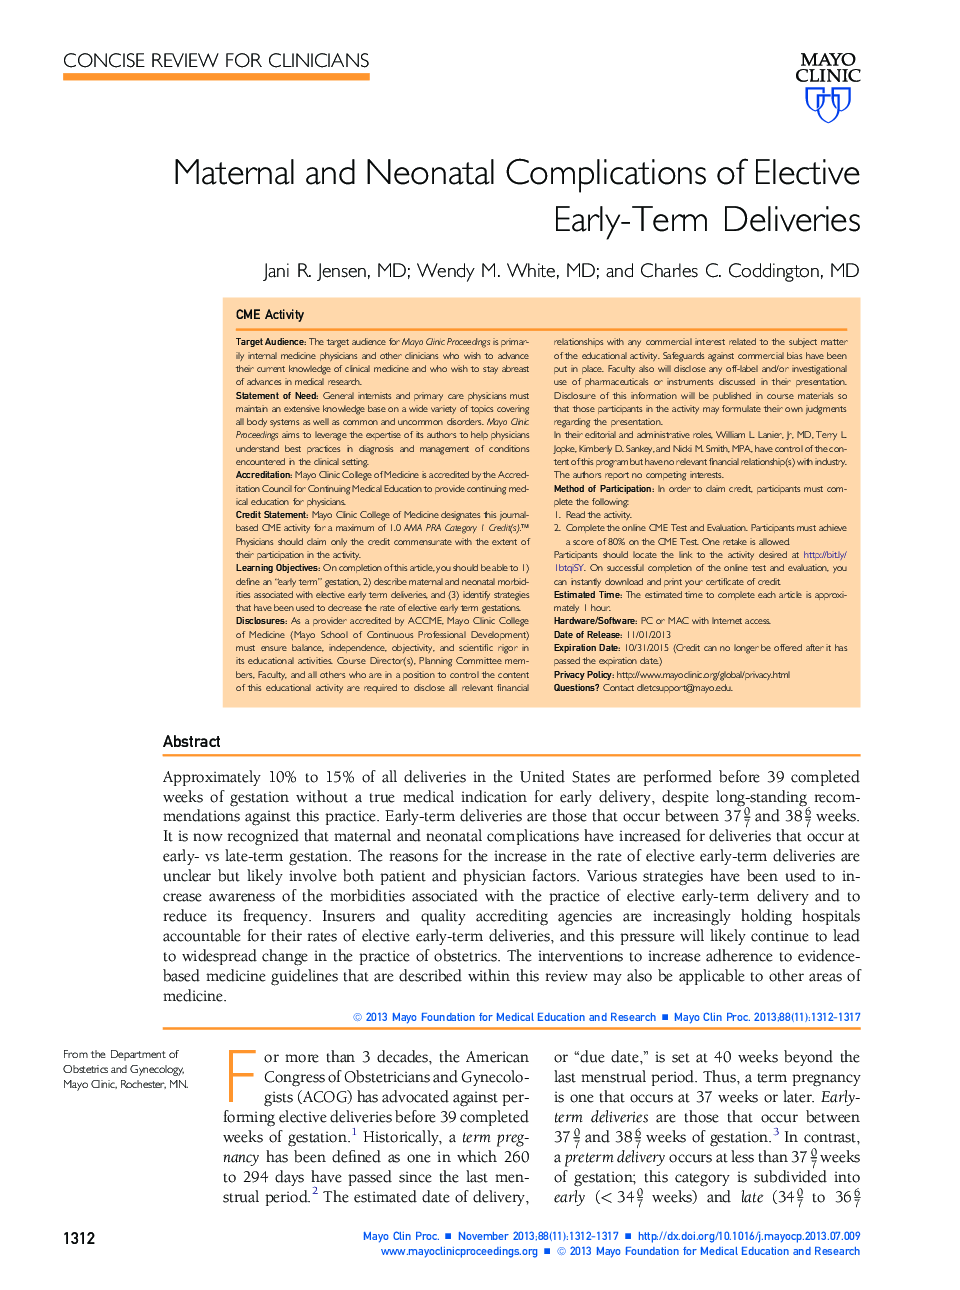 Maternal and Neonatal Complications of Elective Early-Term Deliveries